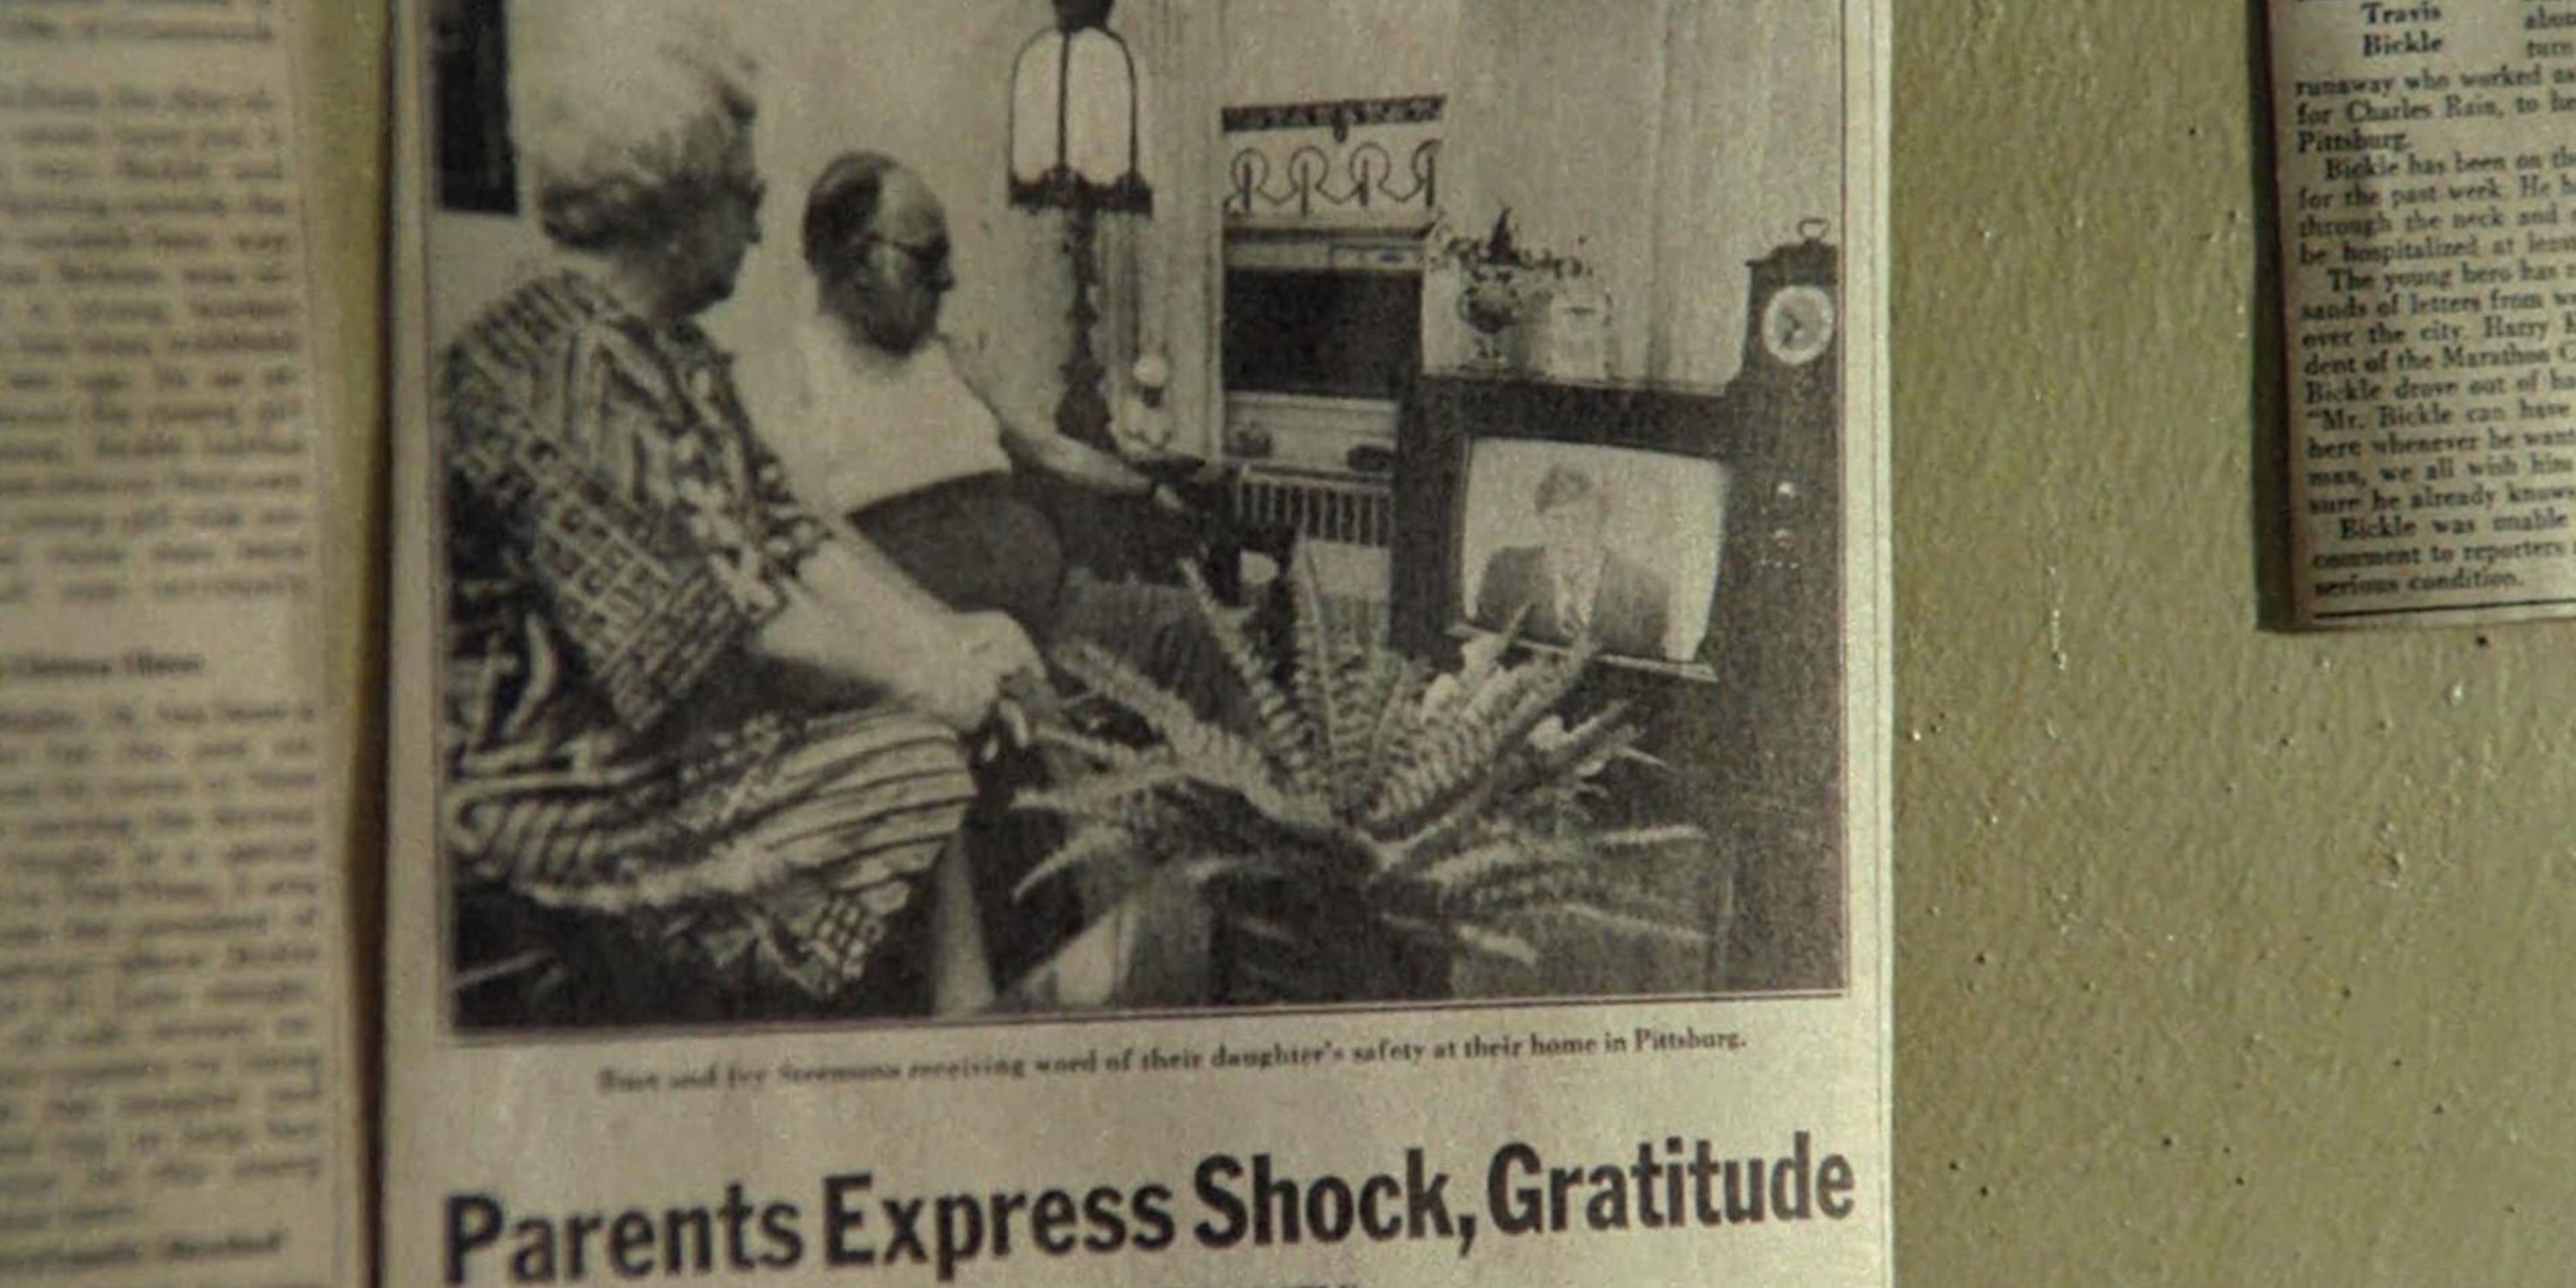 A shot of a newspaper clipping from the end of Taxi Driver, describing Iris' parents gratitude for Travis's actions.